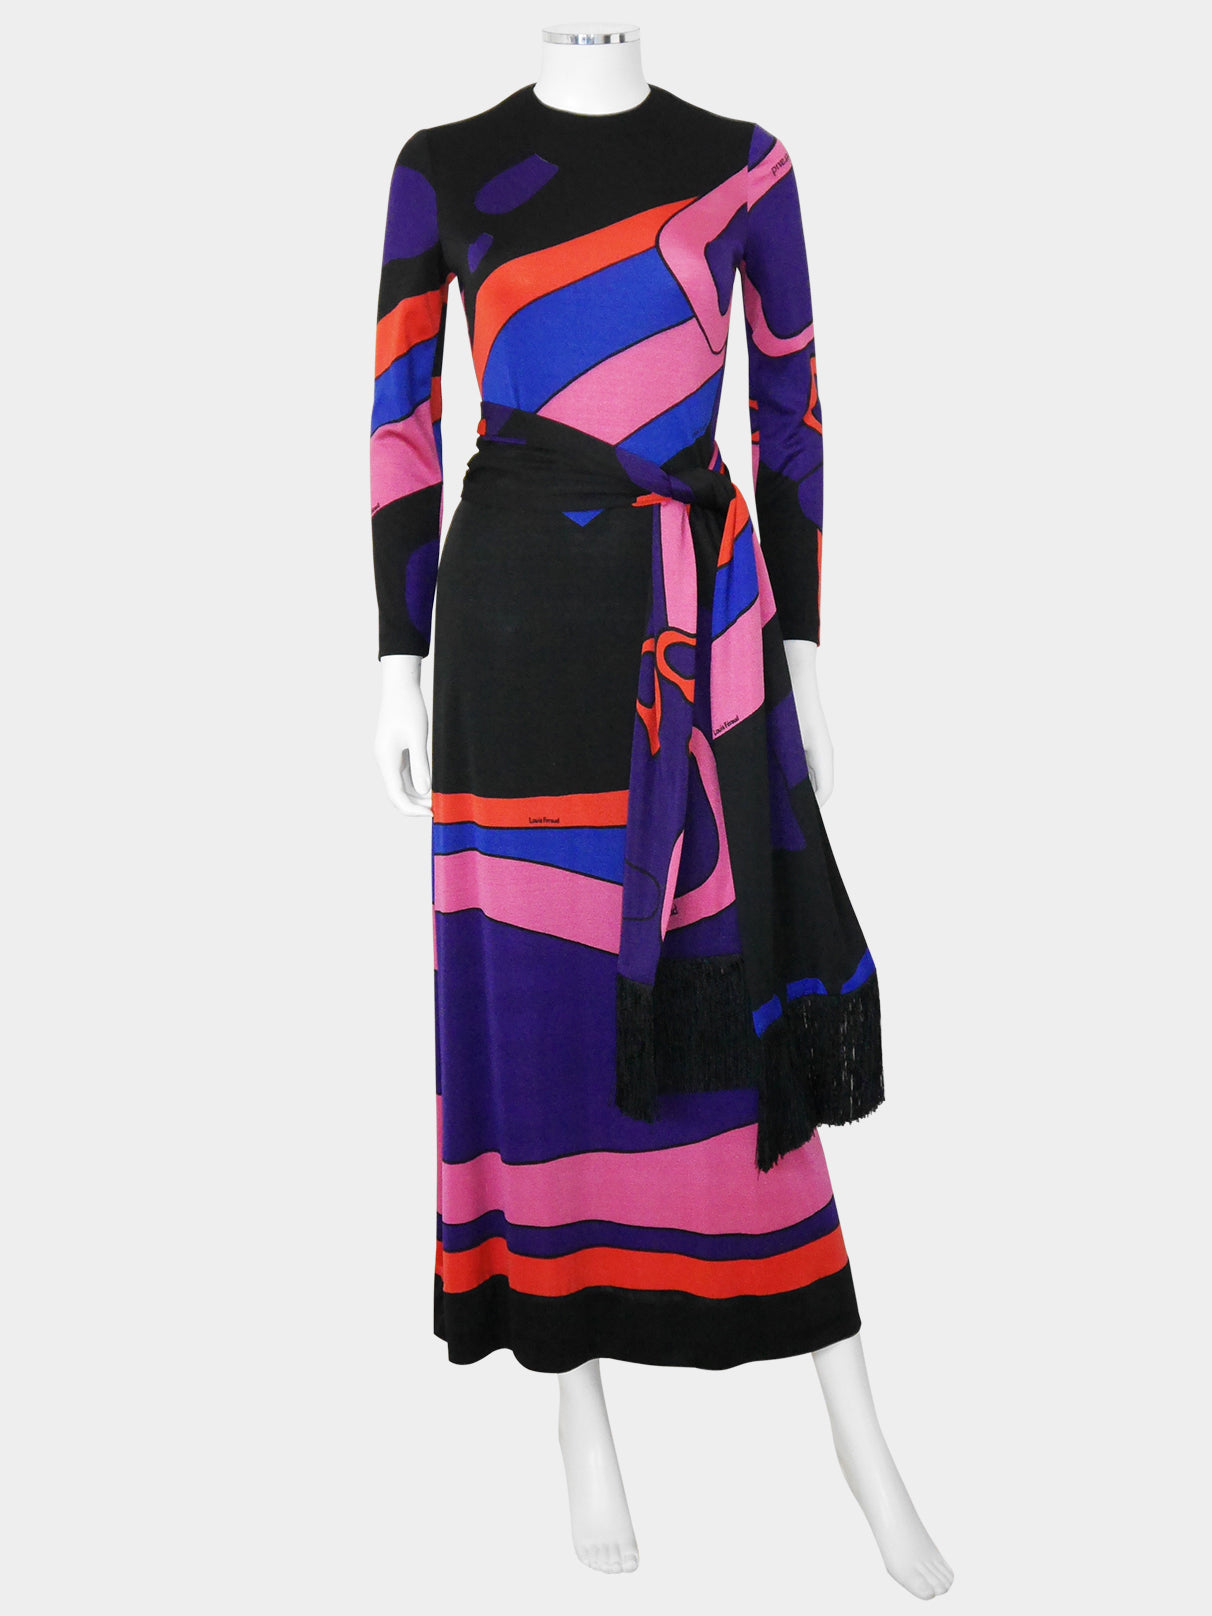 LOUIS FÉRAUD 1960s 1970s Vintage Psychedelic Graphic Print Maxi Dress & Scarf Size XS